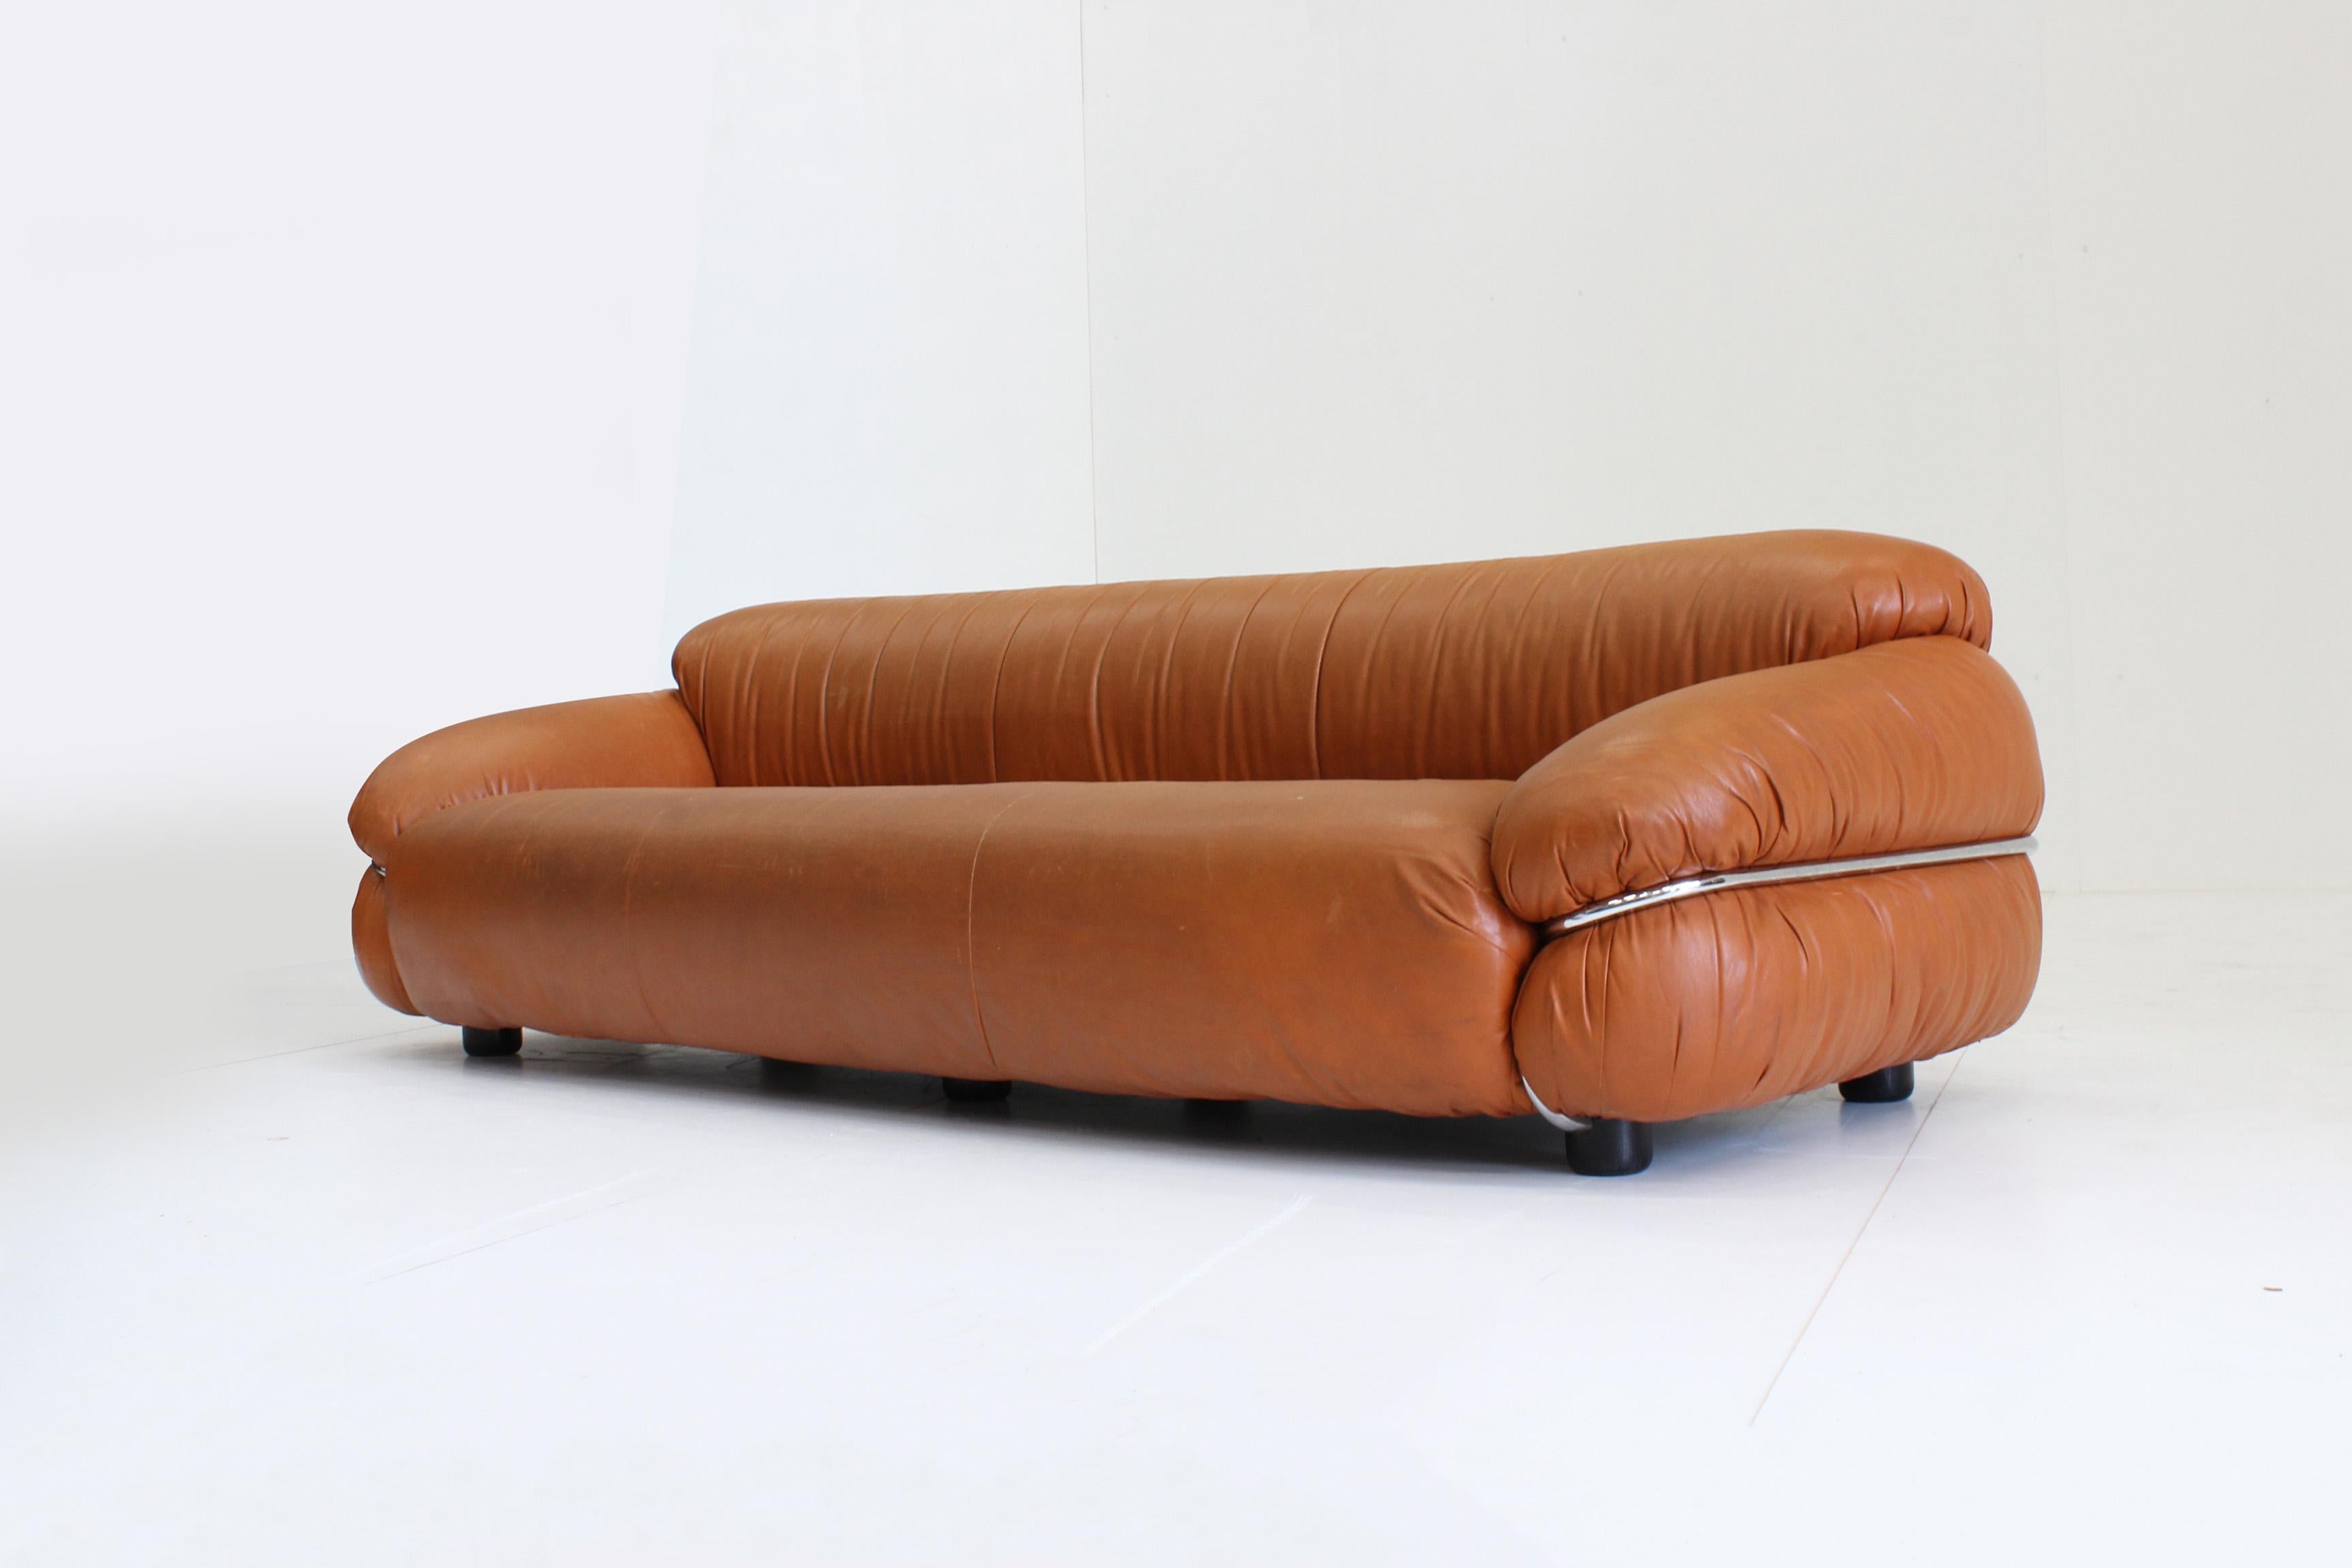 Gianfranco Frattini Sesann sofa for Cassina 1969. This italian 3 seater sofa has a chromed tubular plated steel structure and cognac faux leather.

This design piece is very comfortable. Overall good condition with wear and patina consistent with